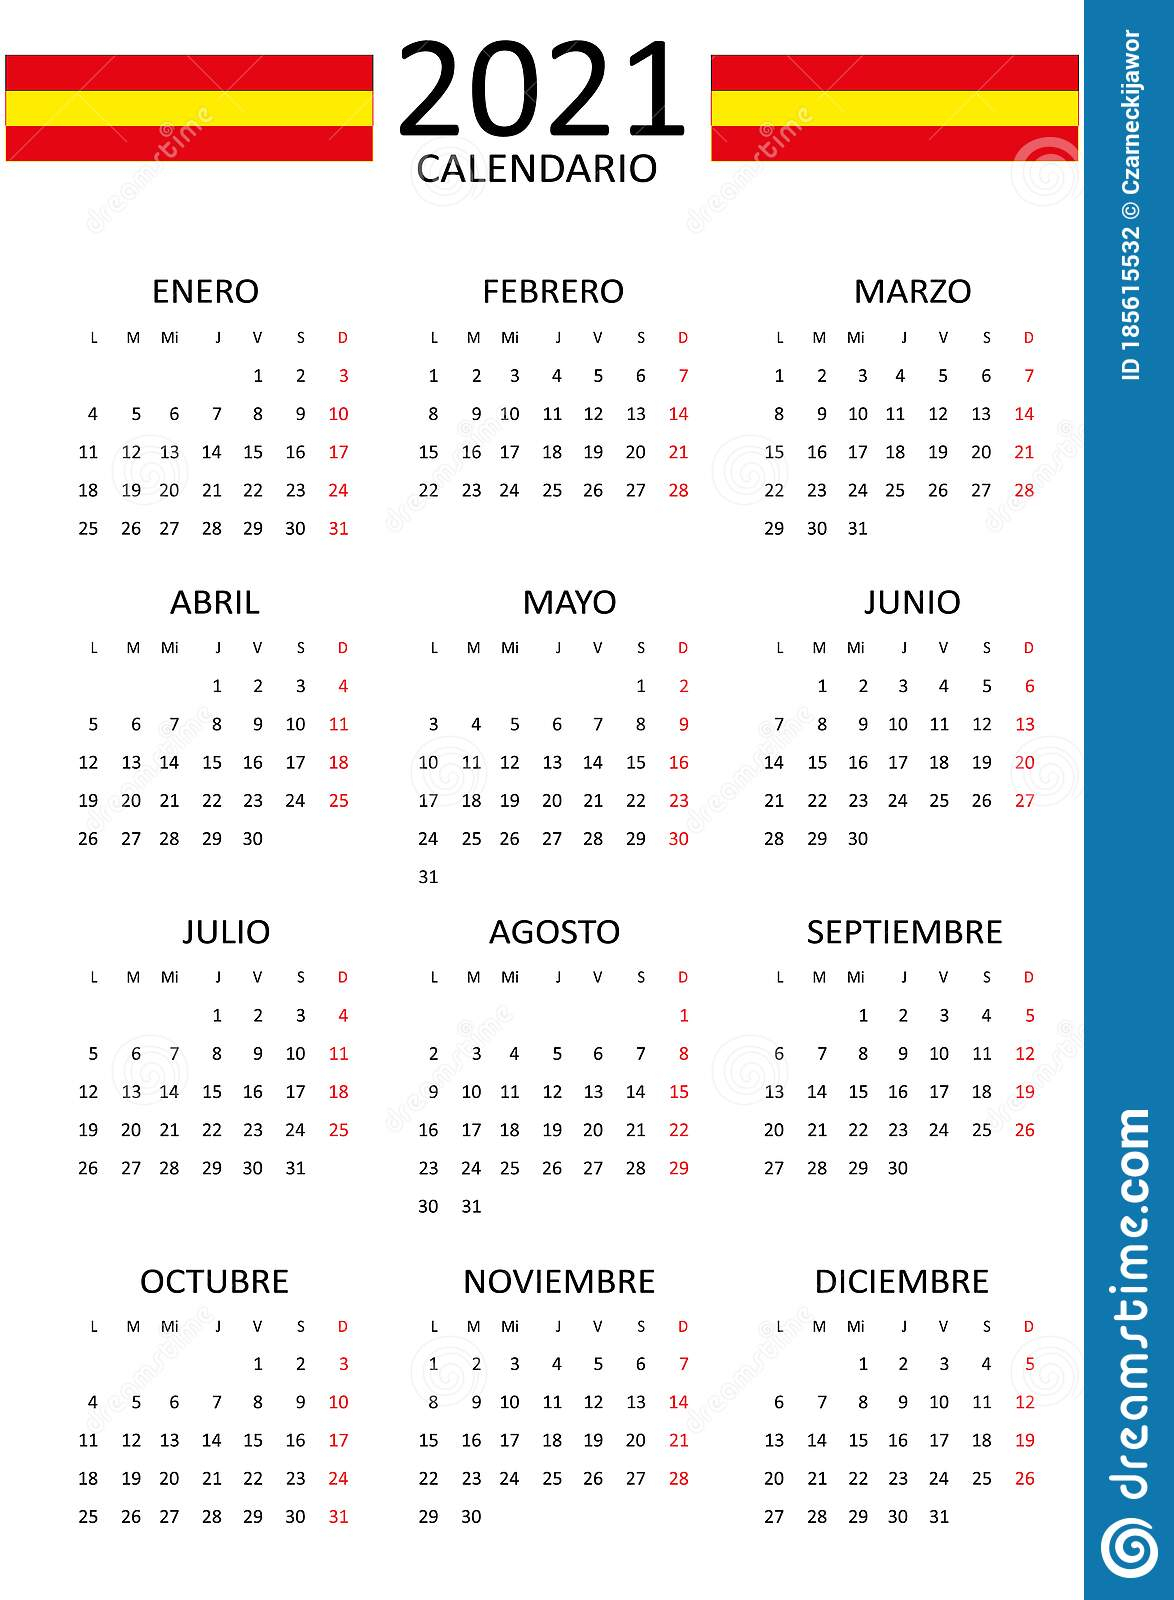 Spanish Calendar For 2021. 12 Months On One Page. Weekend